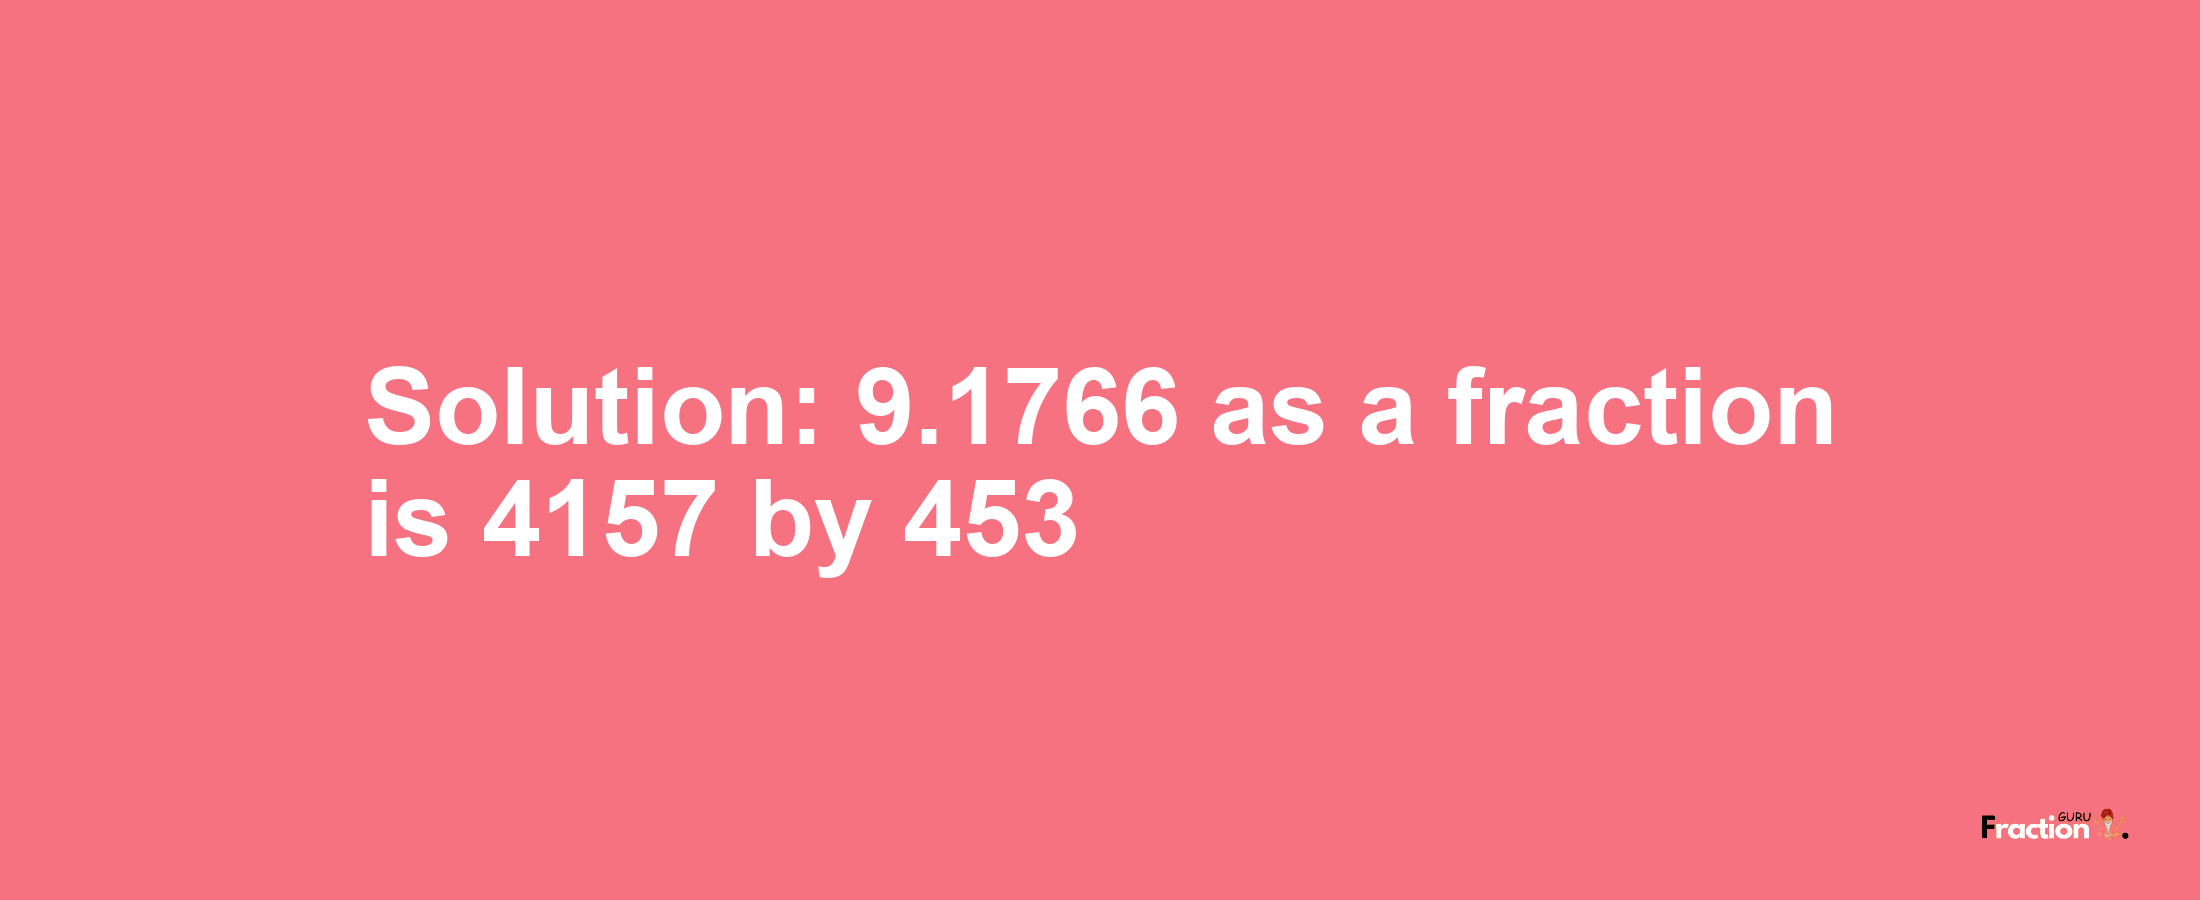 Solution:9.1766 as a fraction is 4157/453